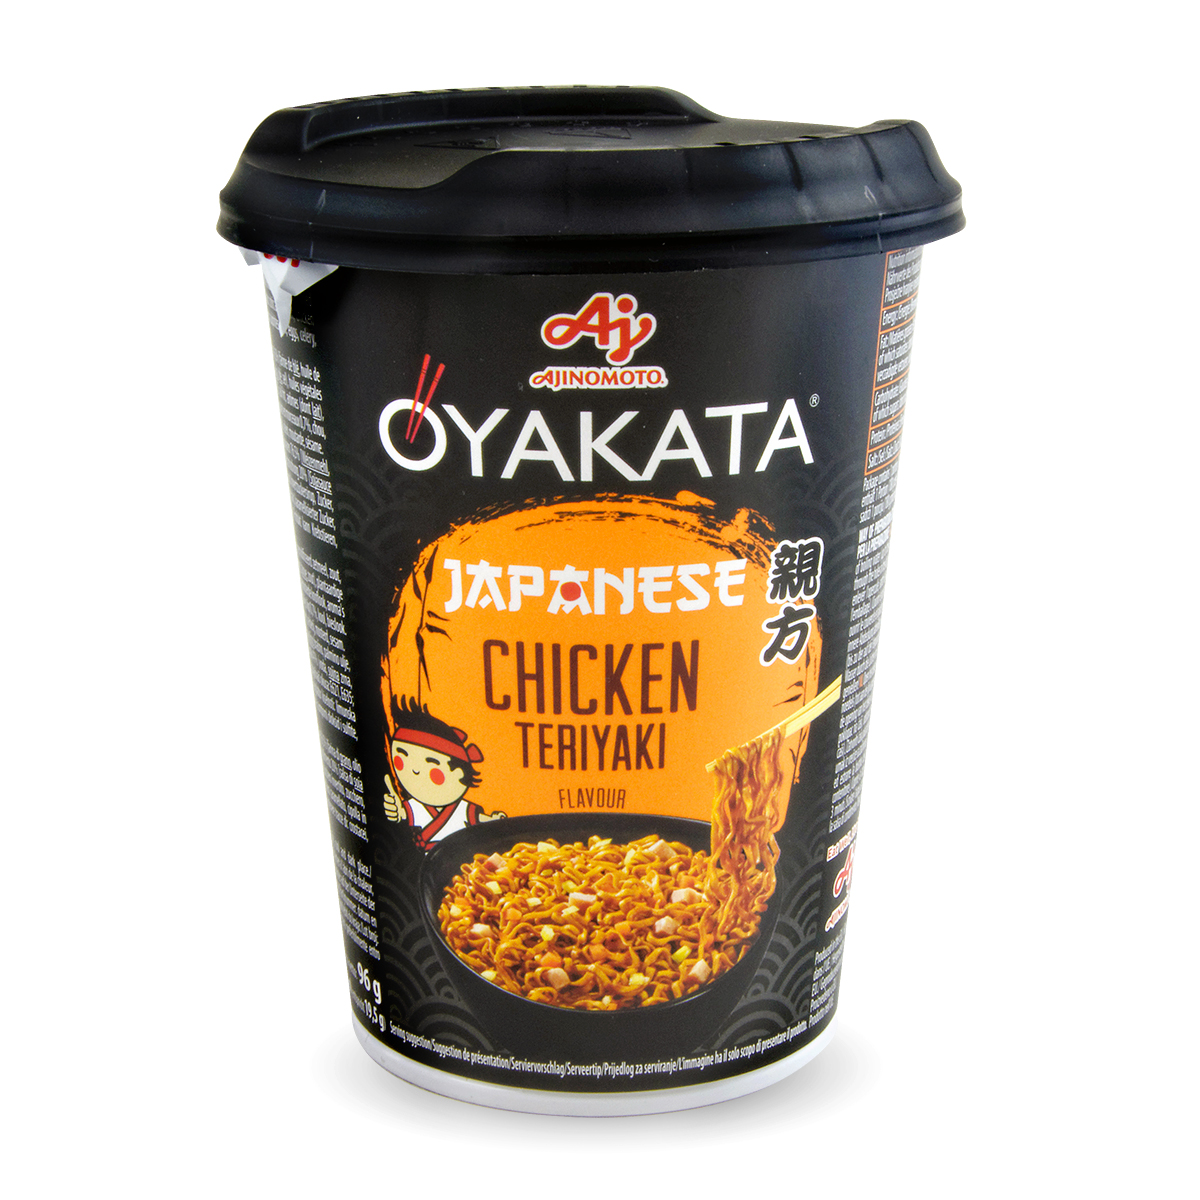 Supe instant la CUP/BOWL - Taitei instant Chicken Teriyaki Flavour CUP OYAKATA 96g, asianfood.ro